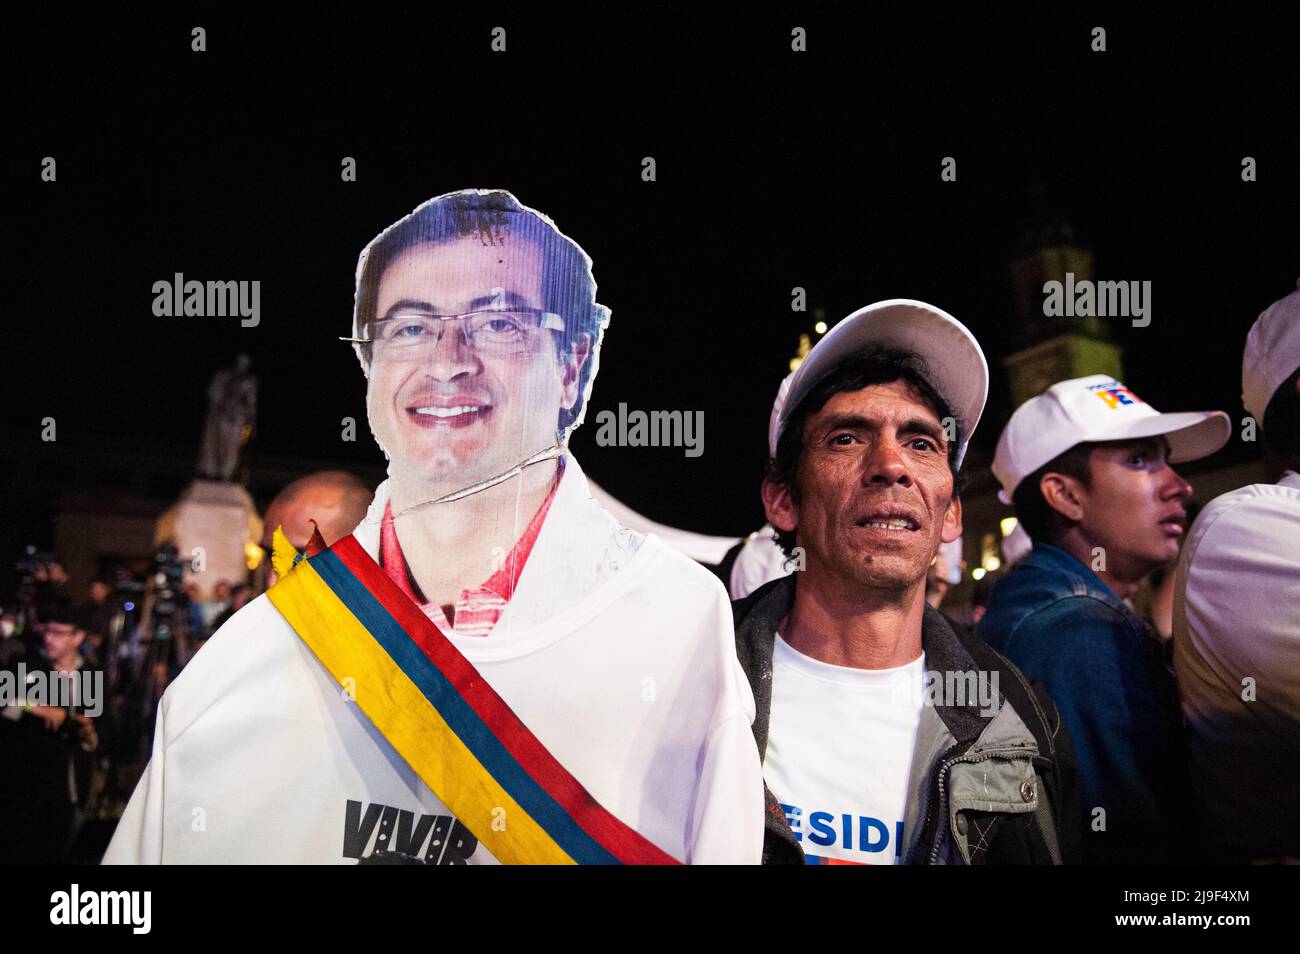 A supporter carries a cut-out carboard figure of presidential candidate Gustavo Petro during the closing campaign rally of left-wing presidential cand Stock Photo